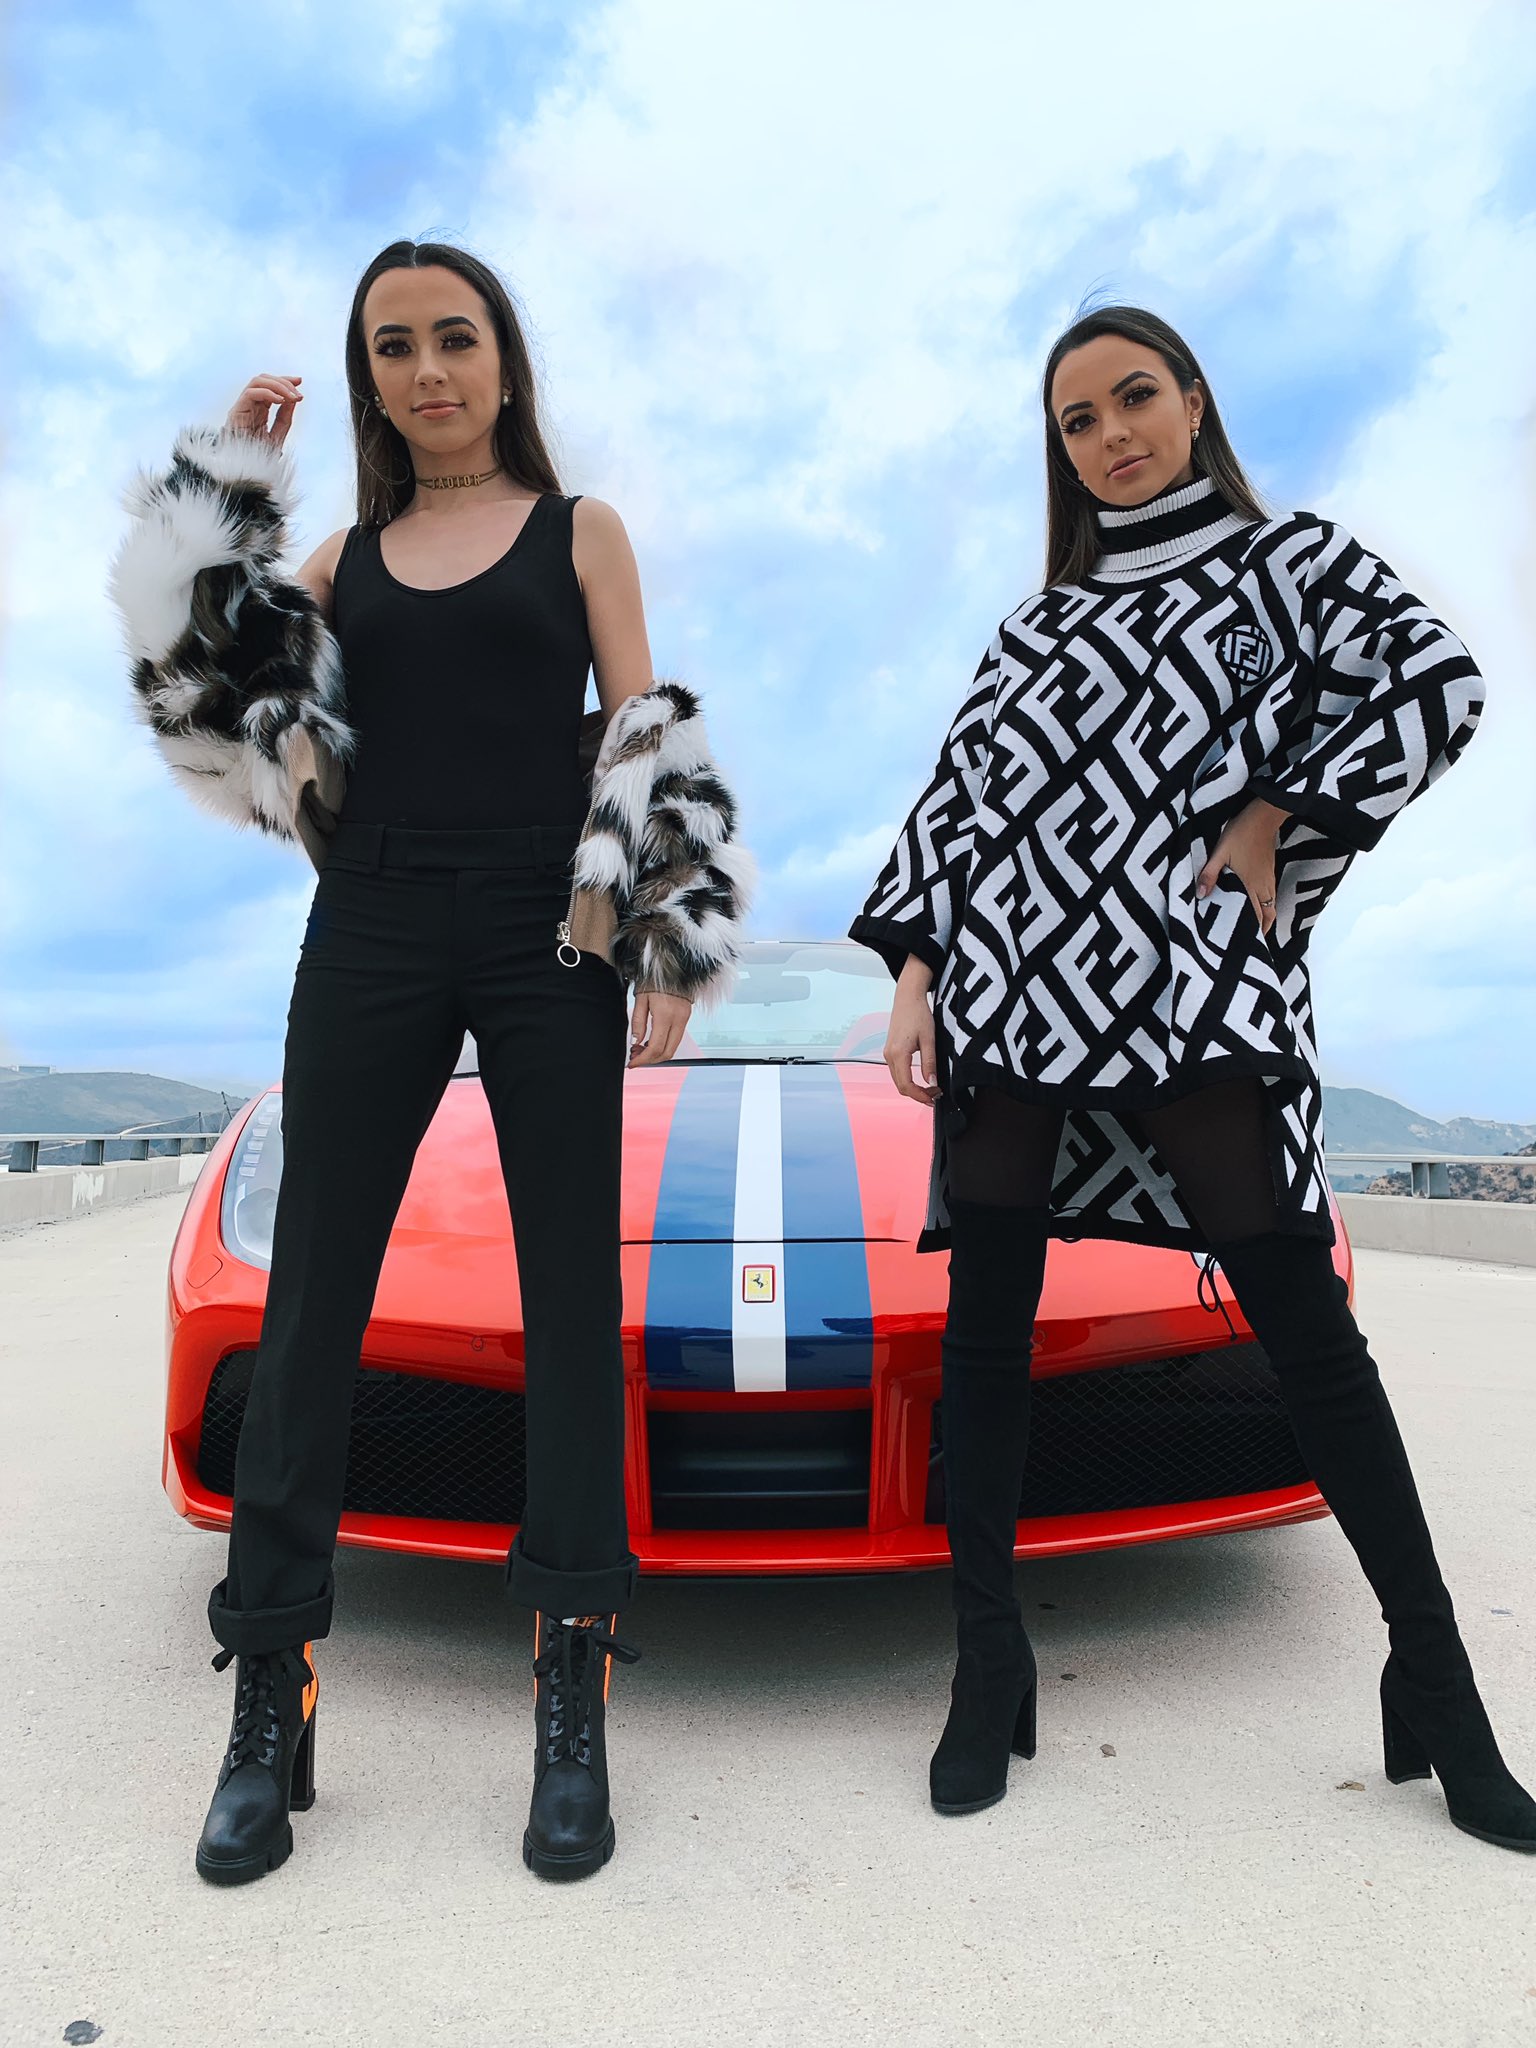 Merrell Twins on Twitter: "It matter where you're going, who you have beside you ♡♡ /